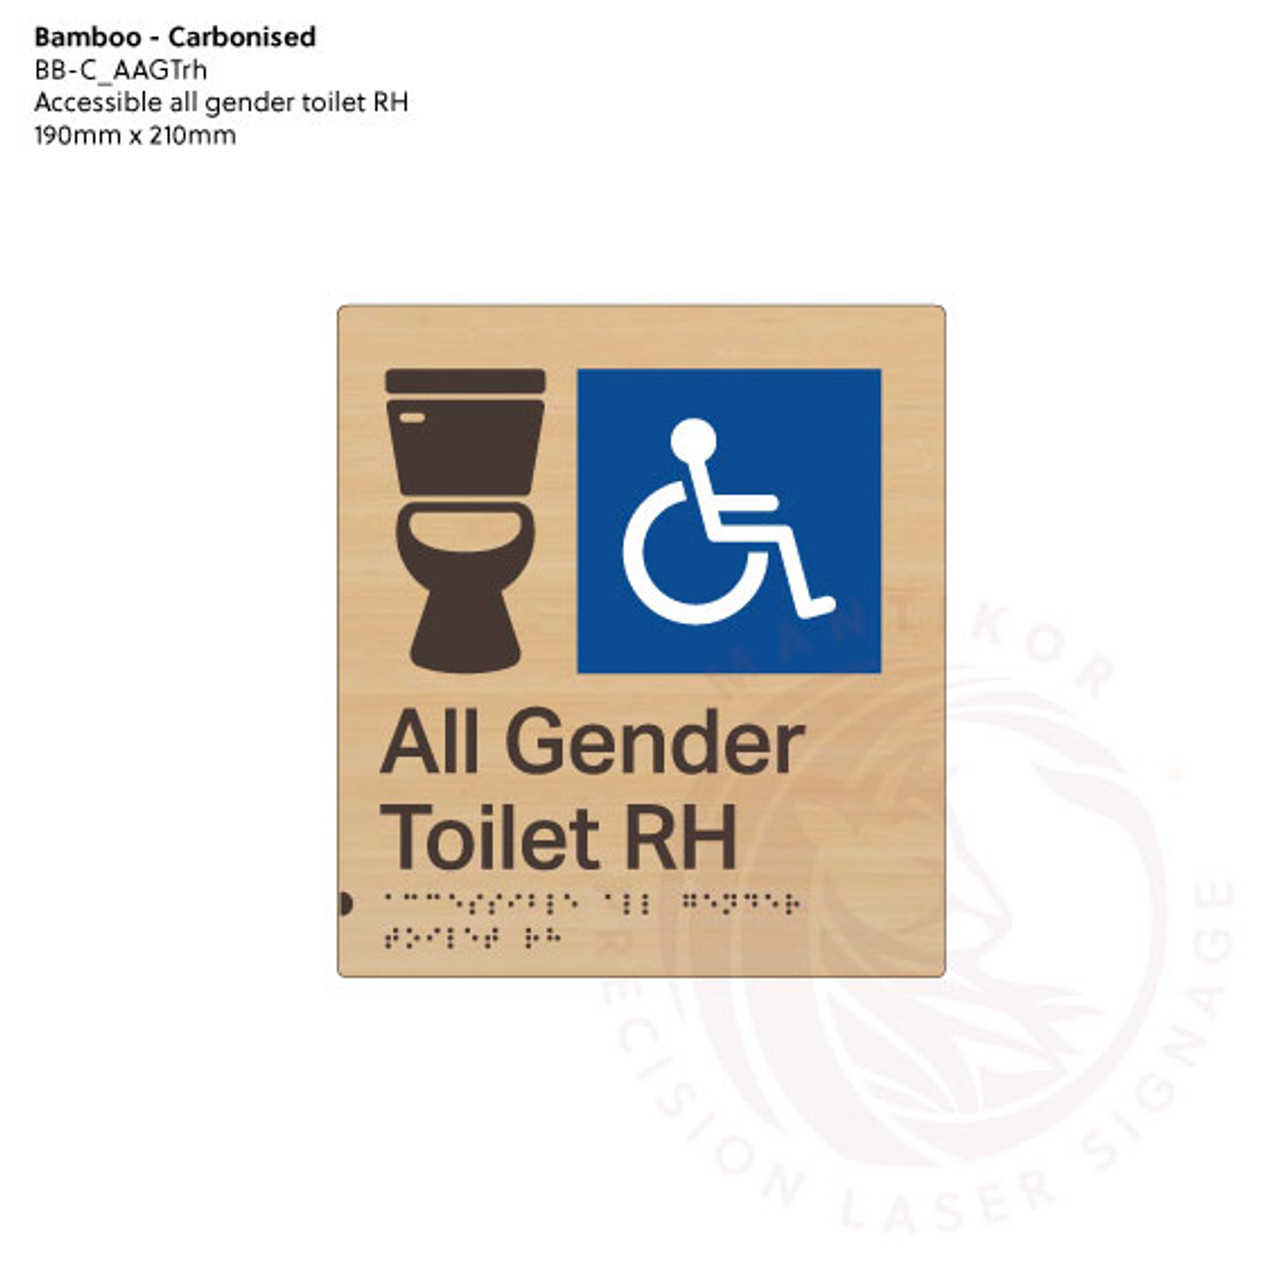 Carbonised Bamboo Tactile Braille Signs - Accessible All Gender Toilet RH